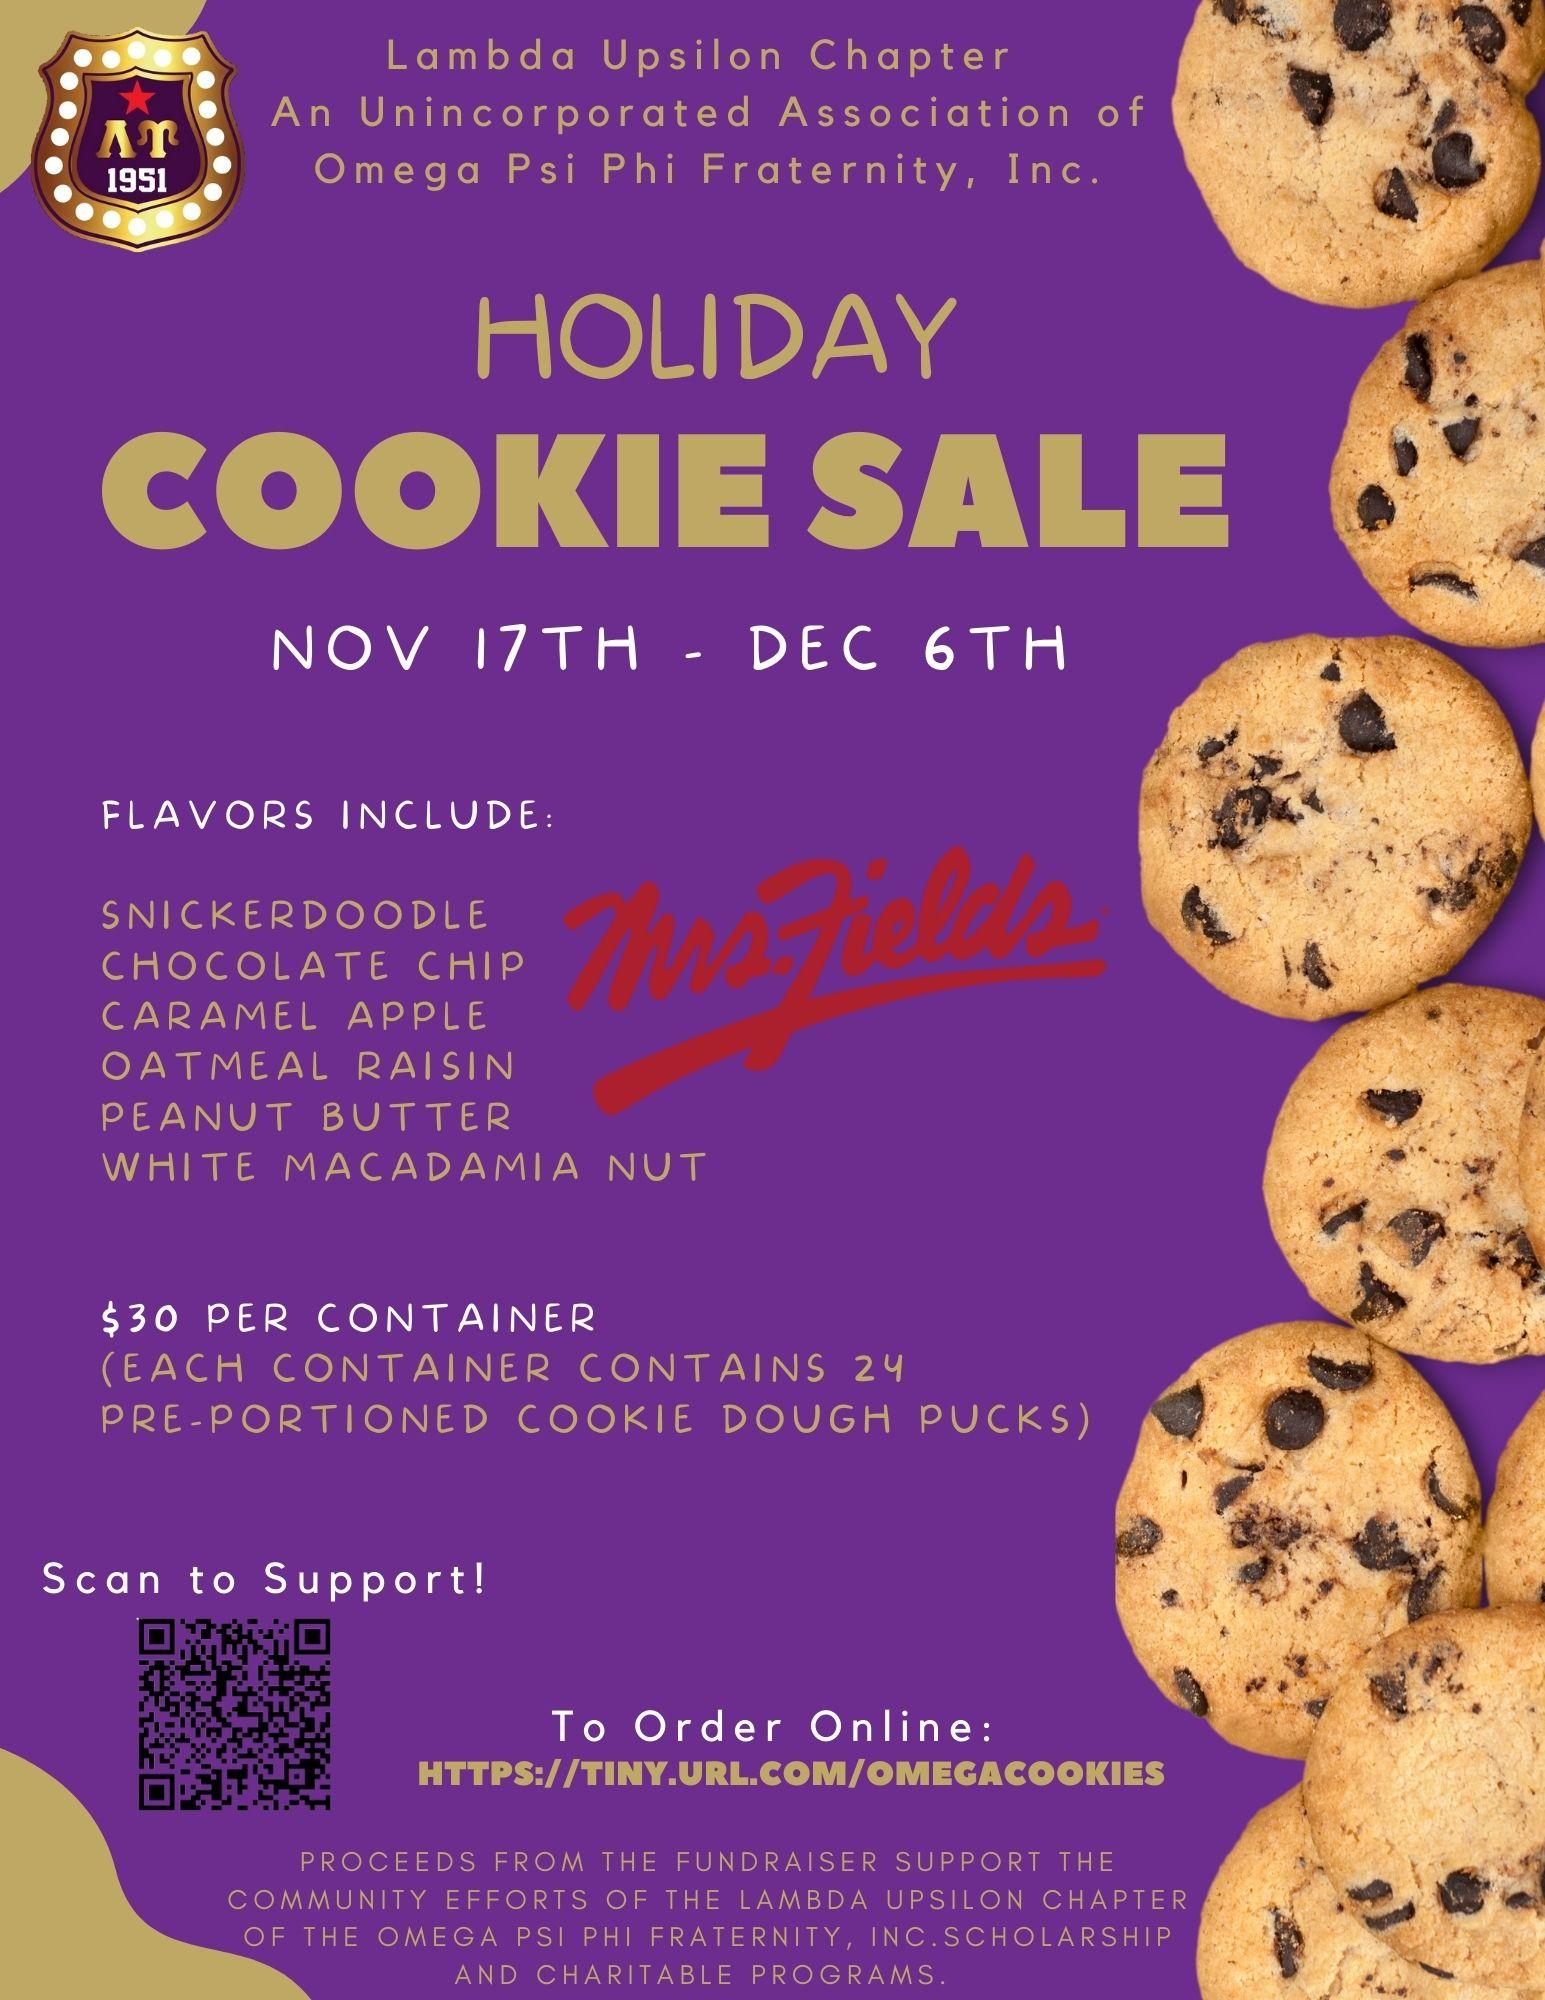 Mrs. Field's Holiday Cookie Fundraiser